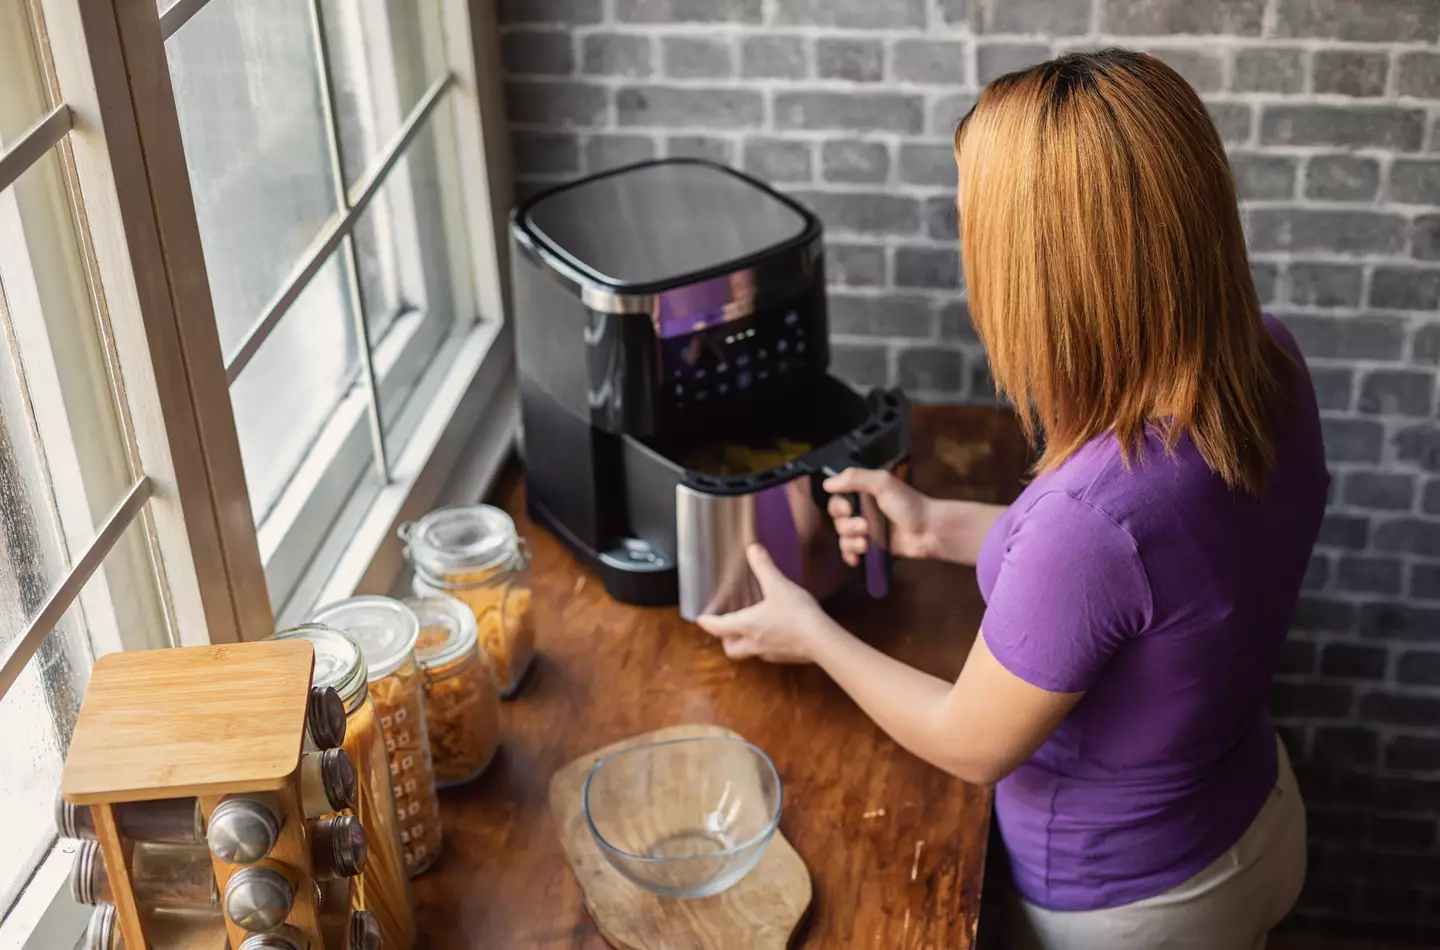 Air fryers have fast become a kitchen staple. (Getty/kajakiki)